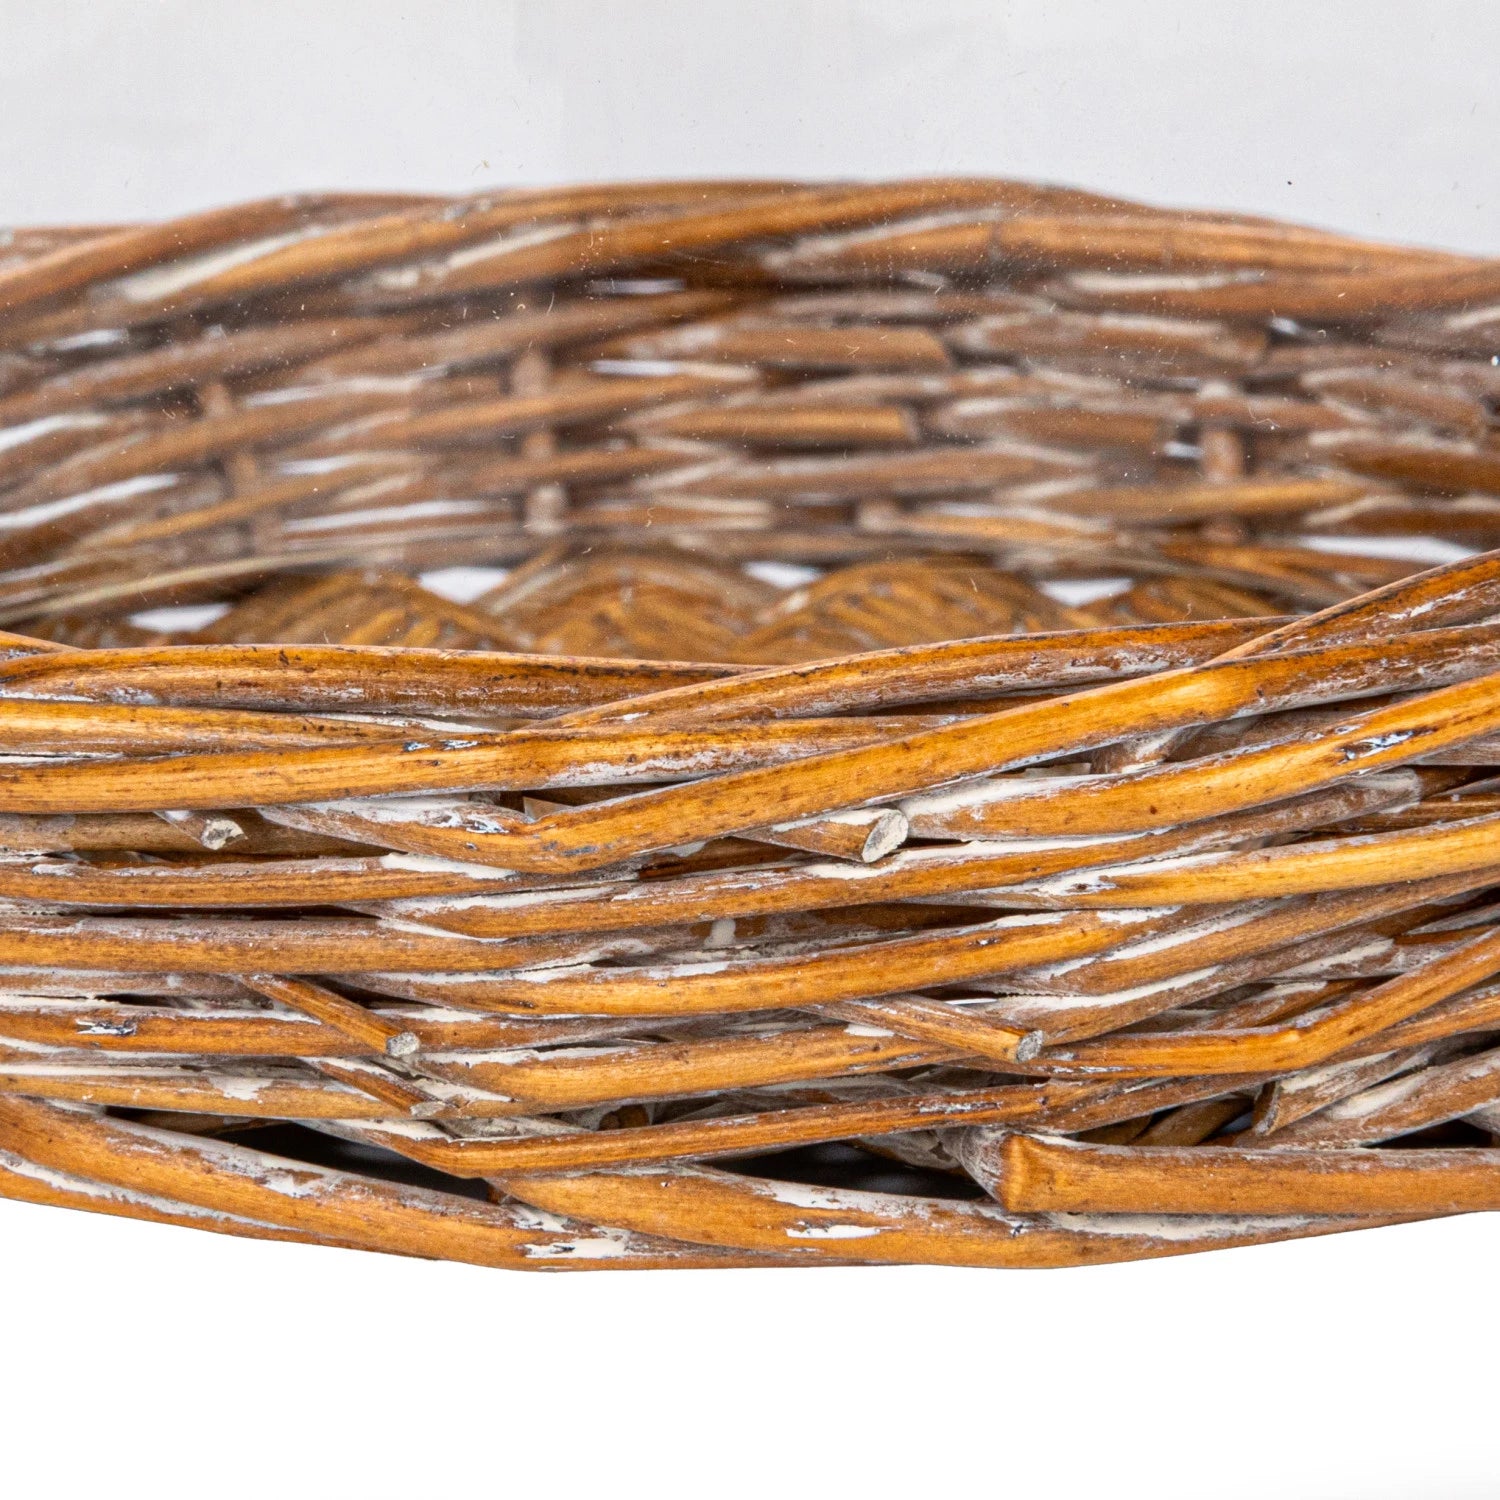 Glass Cloche With Woven Willow Base